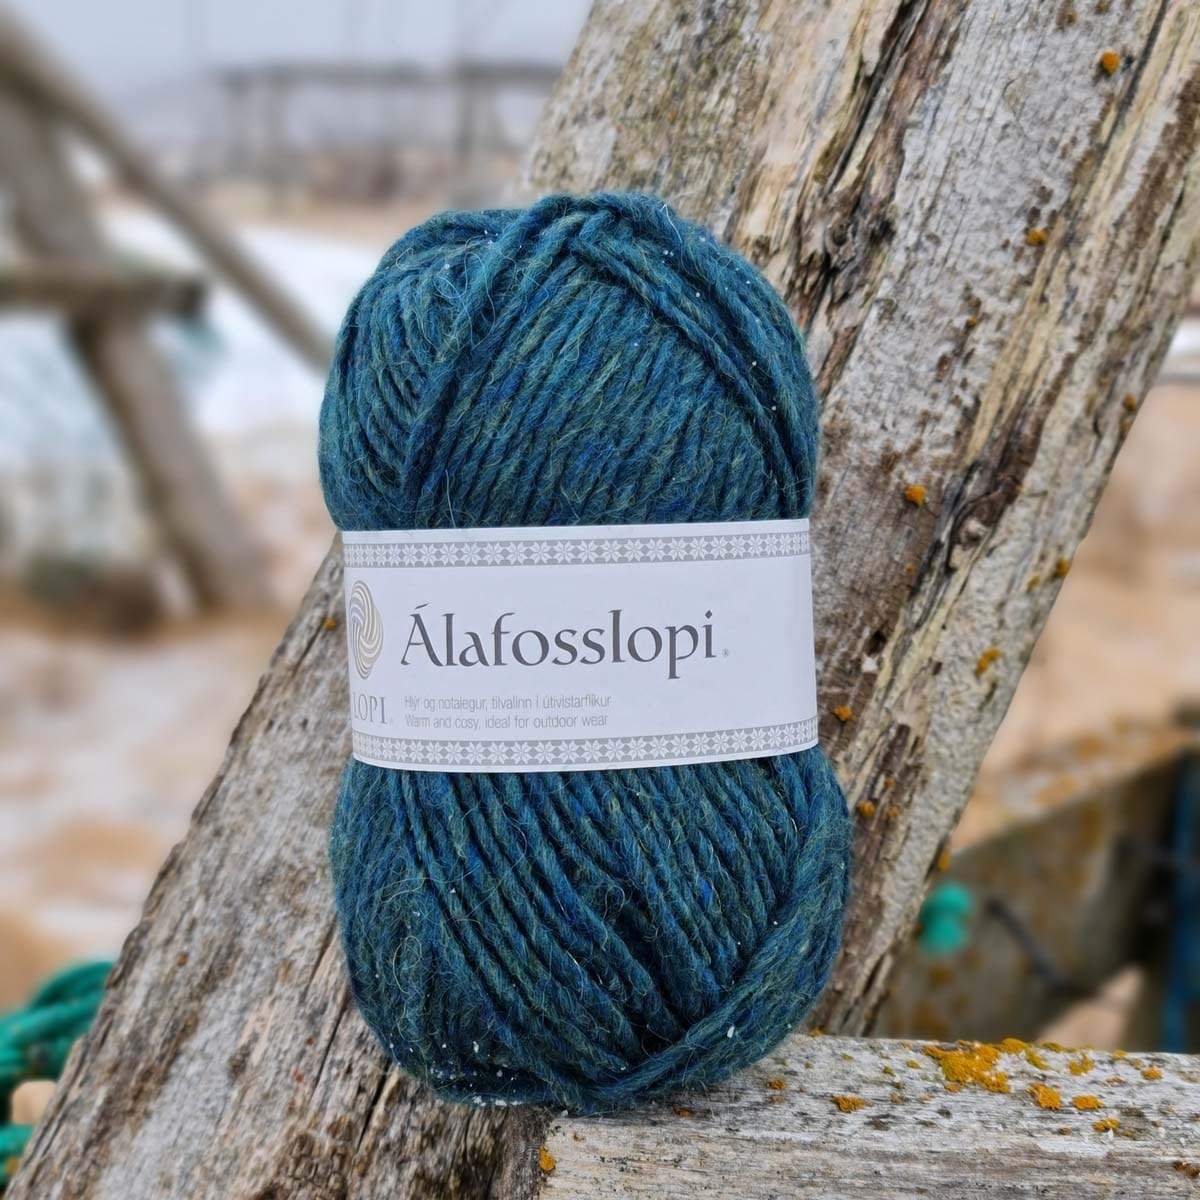 Alafoss Lopi - 9967 Teal Heather - The Icelandic Store